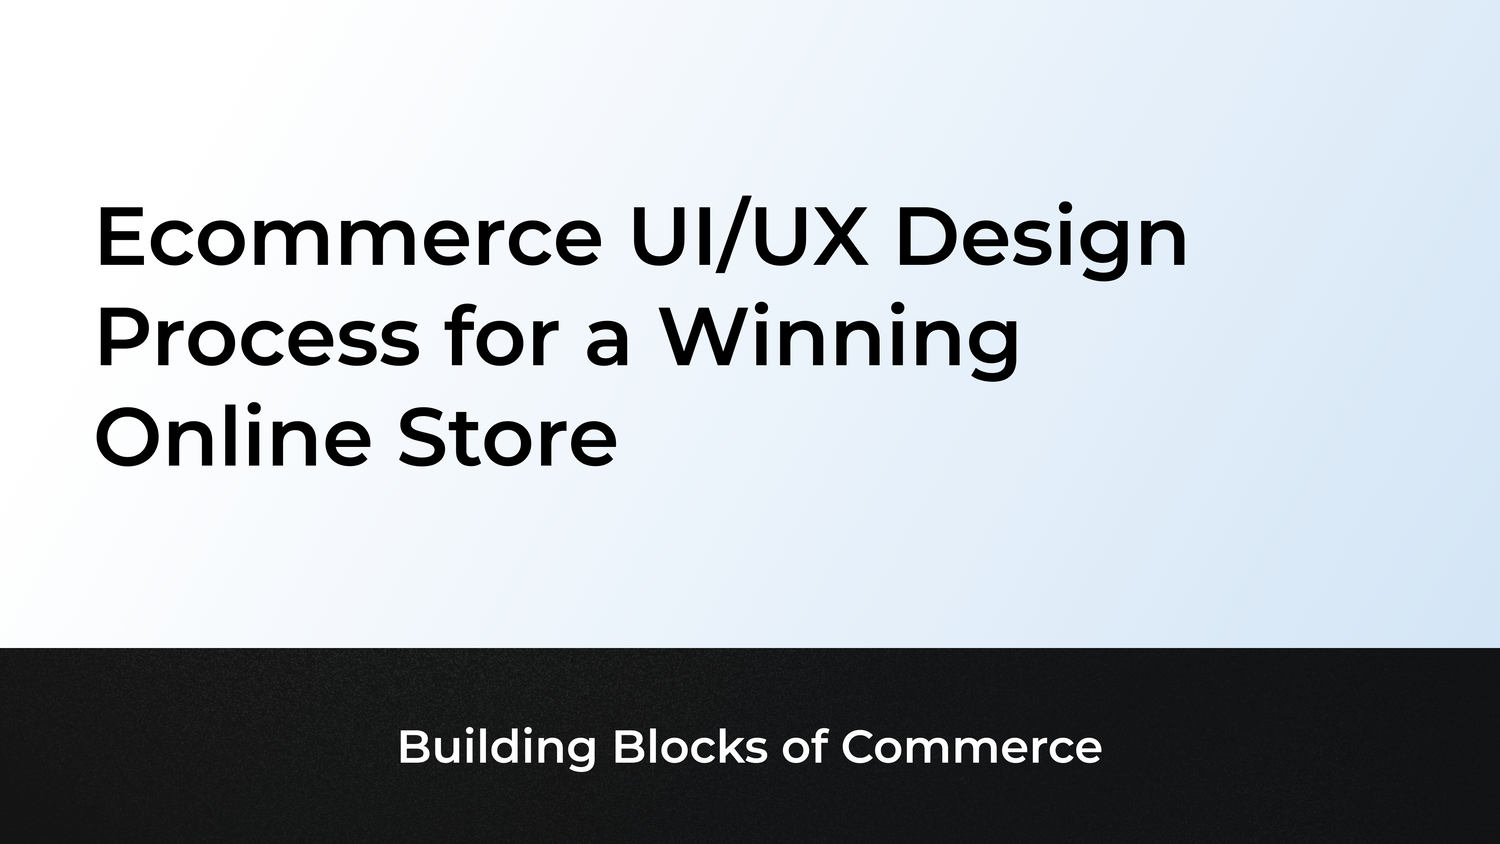 Ecommerce UI/UX Design Process for a Winning Online Store